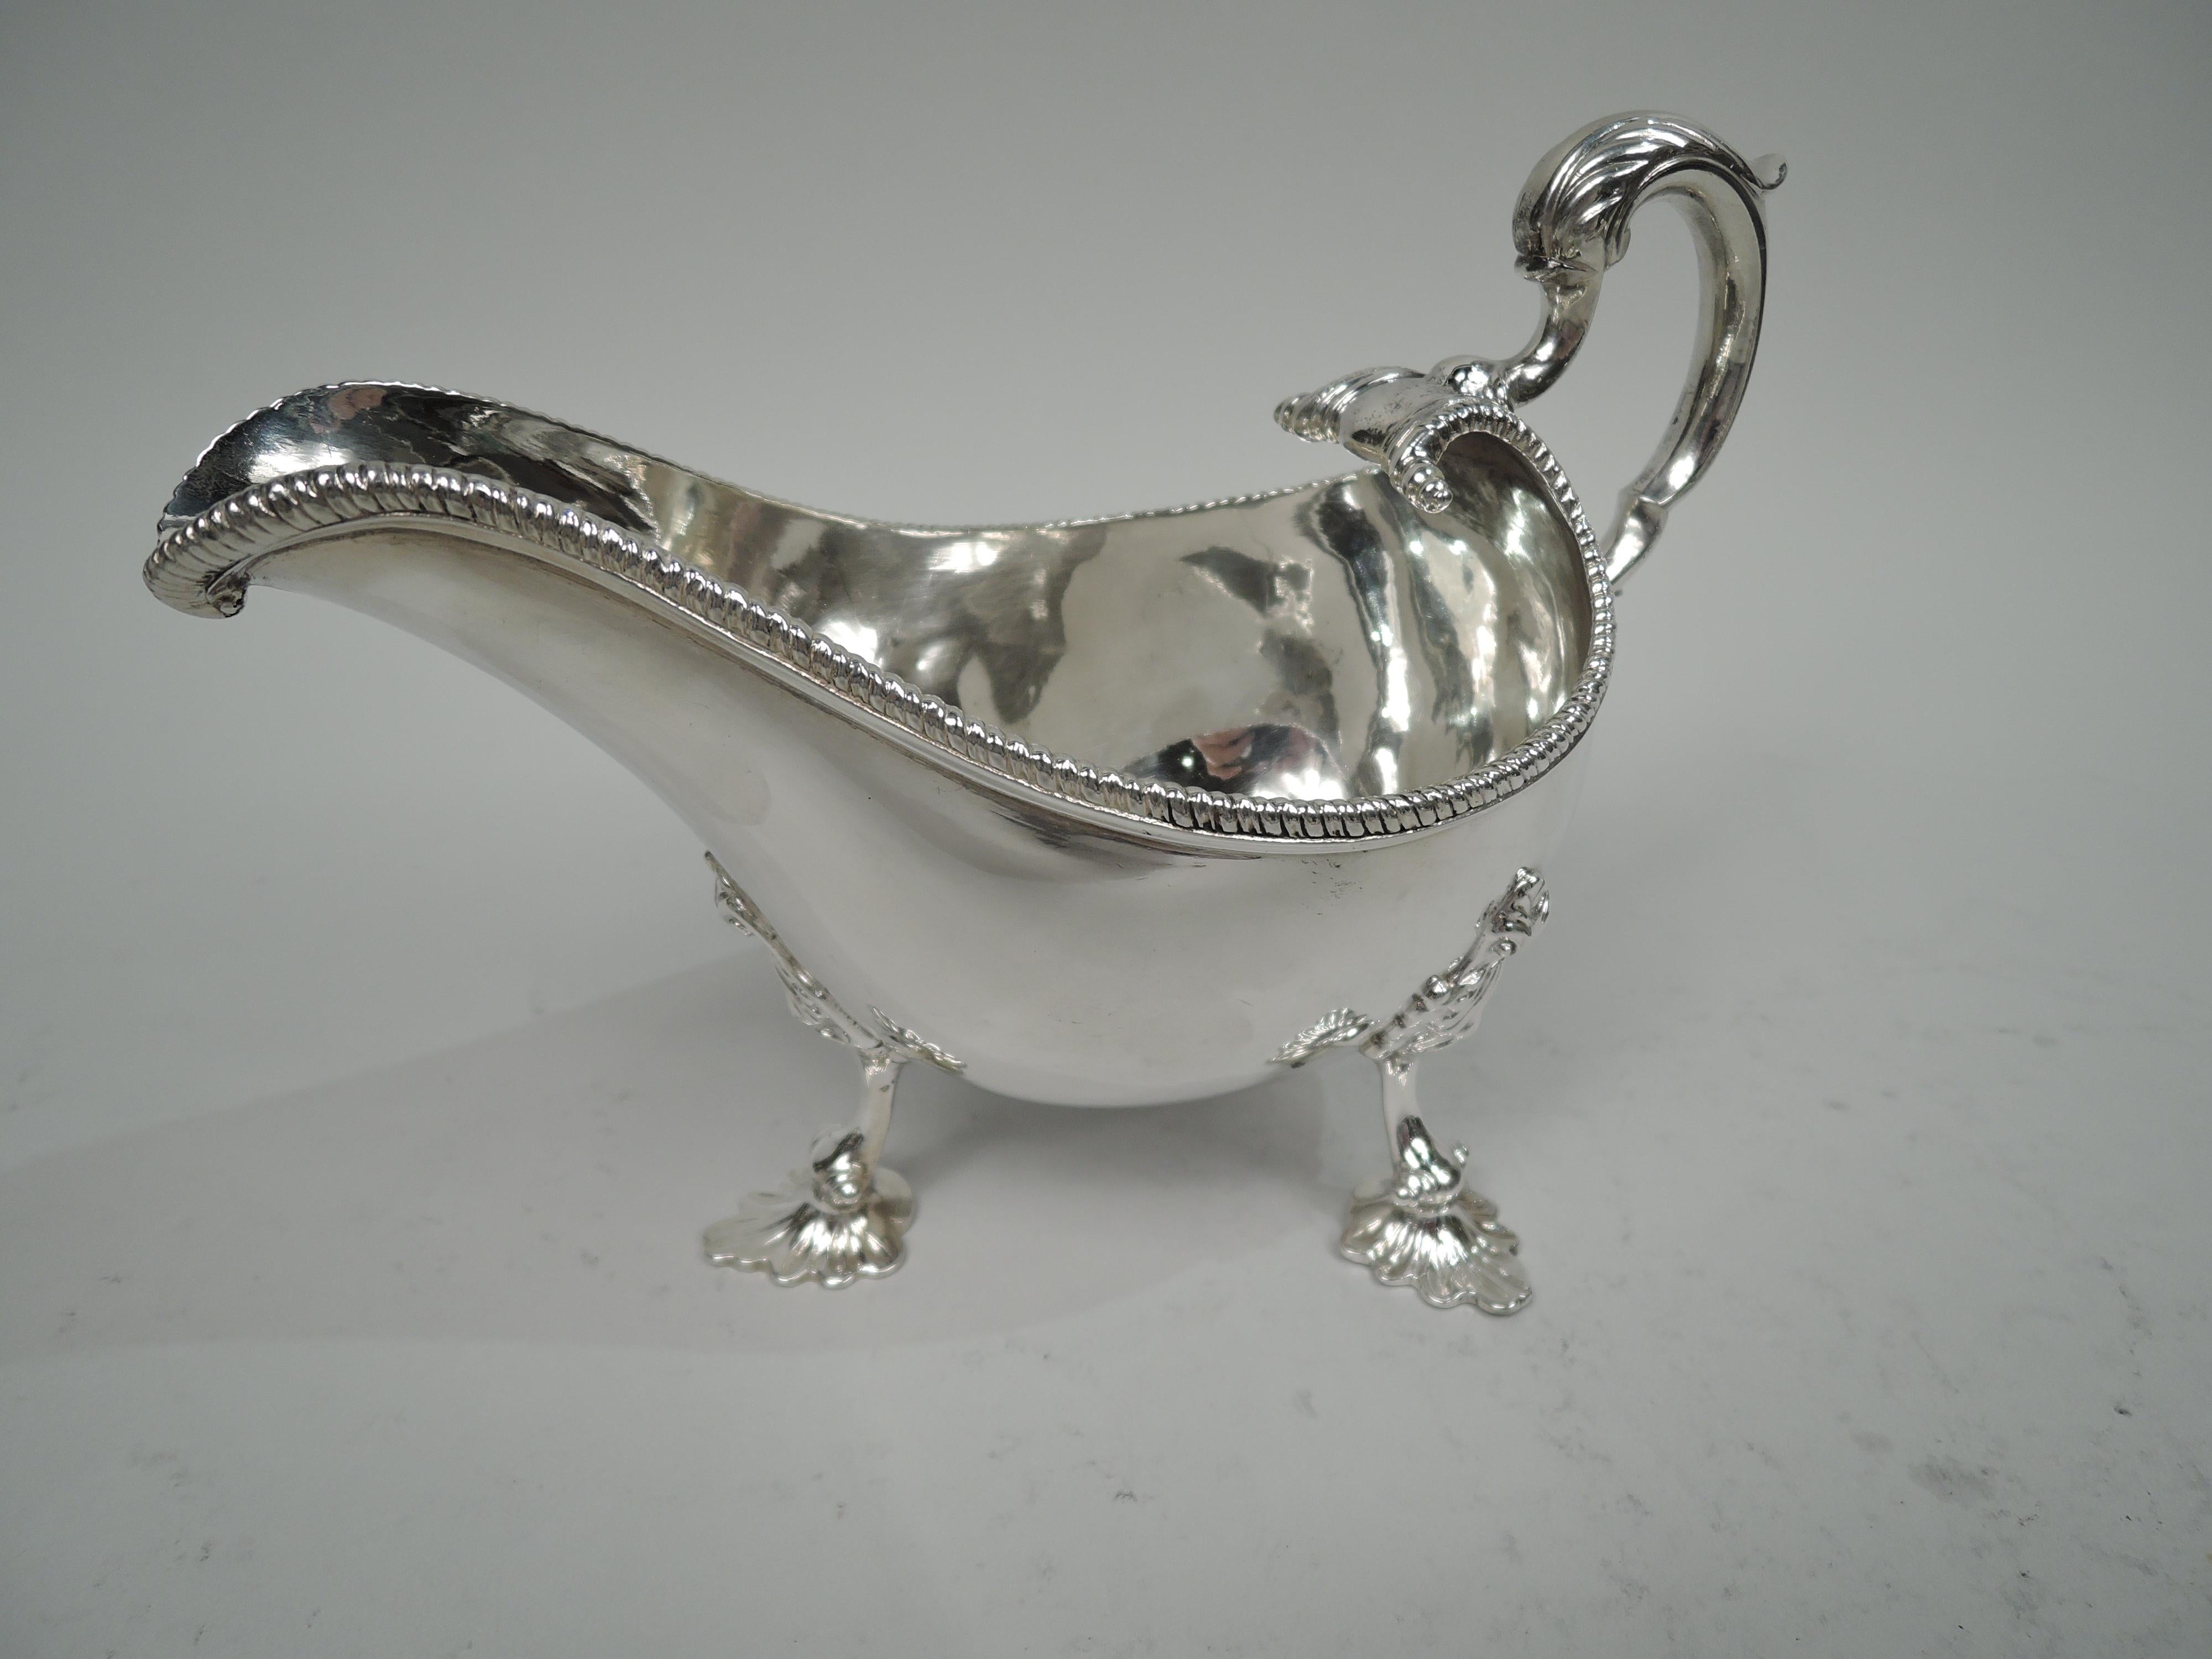 Pair of George III sterling silver gravy boats. Made by William Bond in Dublin in 1794. Each: Ovoid with helmet mouth and gadrooned rim. Leaf-capped double-scroll handle mounted to scrolled end. Three scallop-shell mounted leaf supports. Engraved